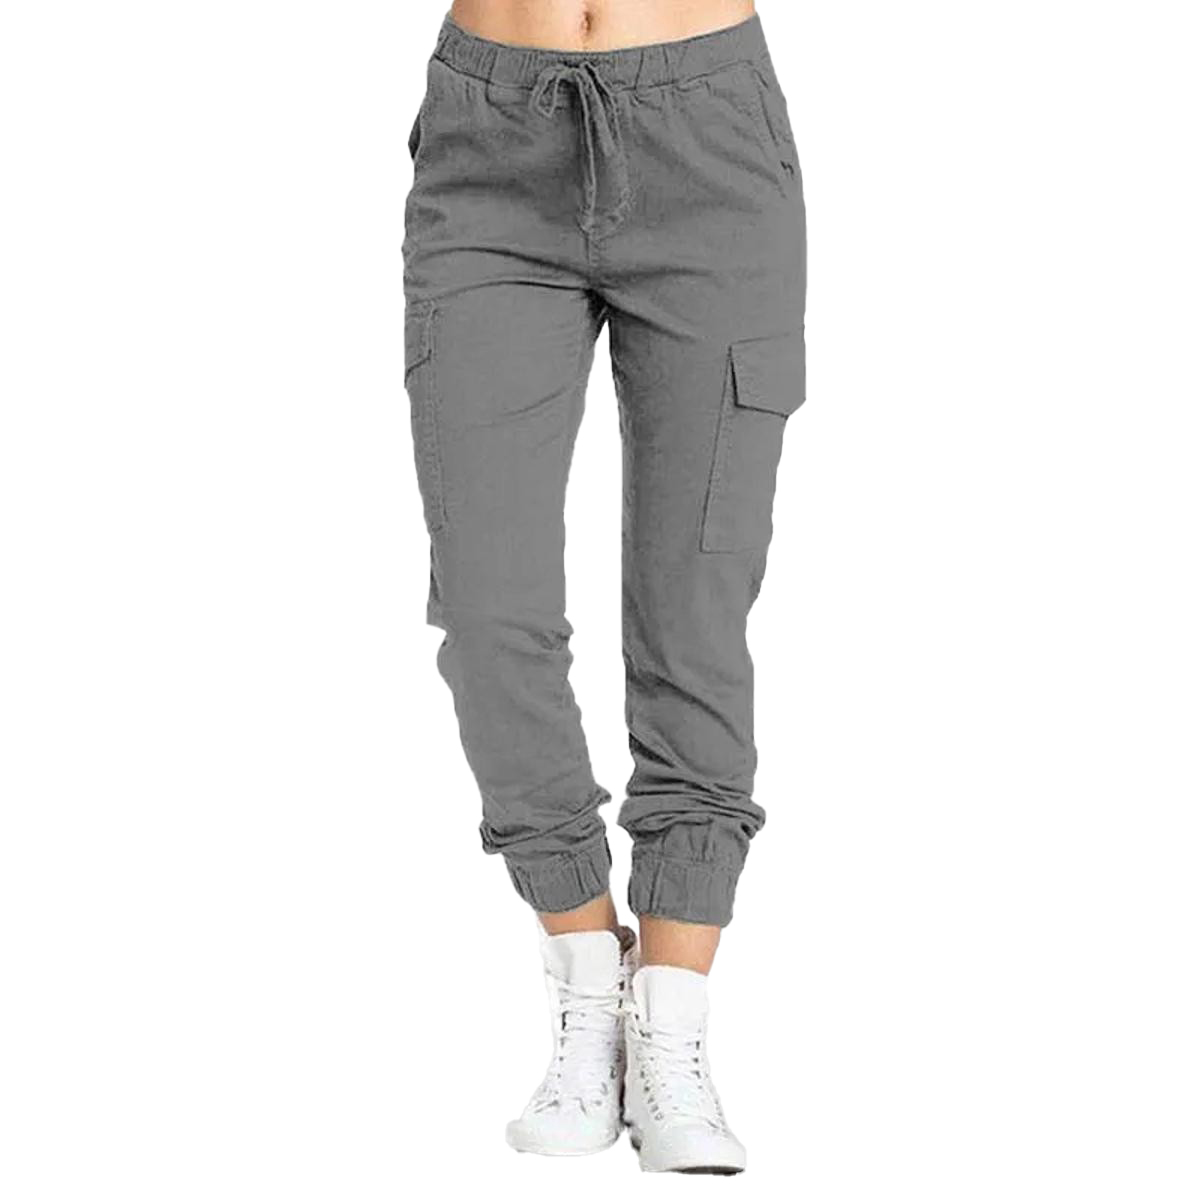 6 Pocket Cargo Trouser for Women and Girls Soft Cotton Slim Fit { NEXT WEAR  }